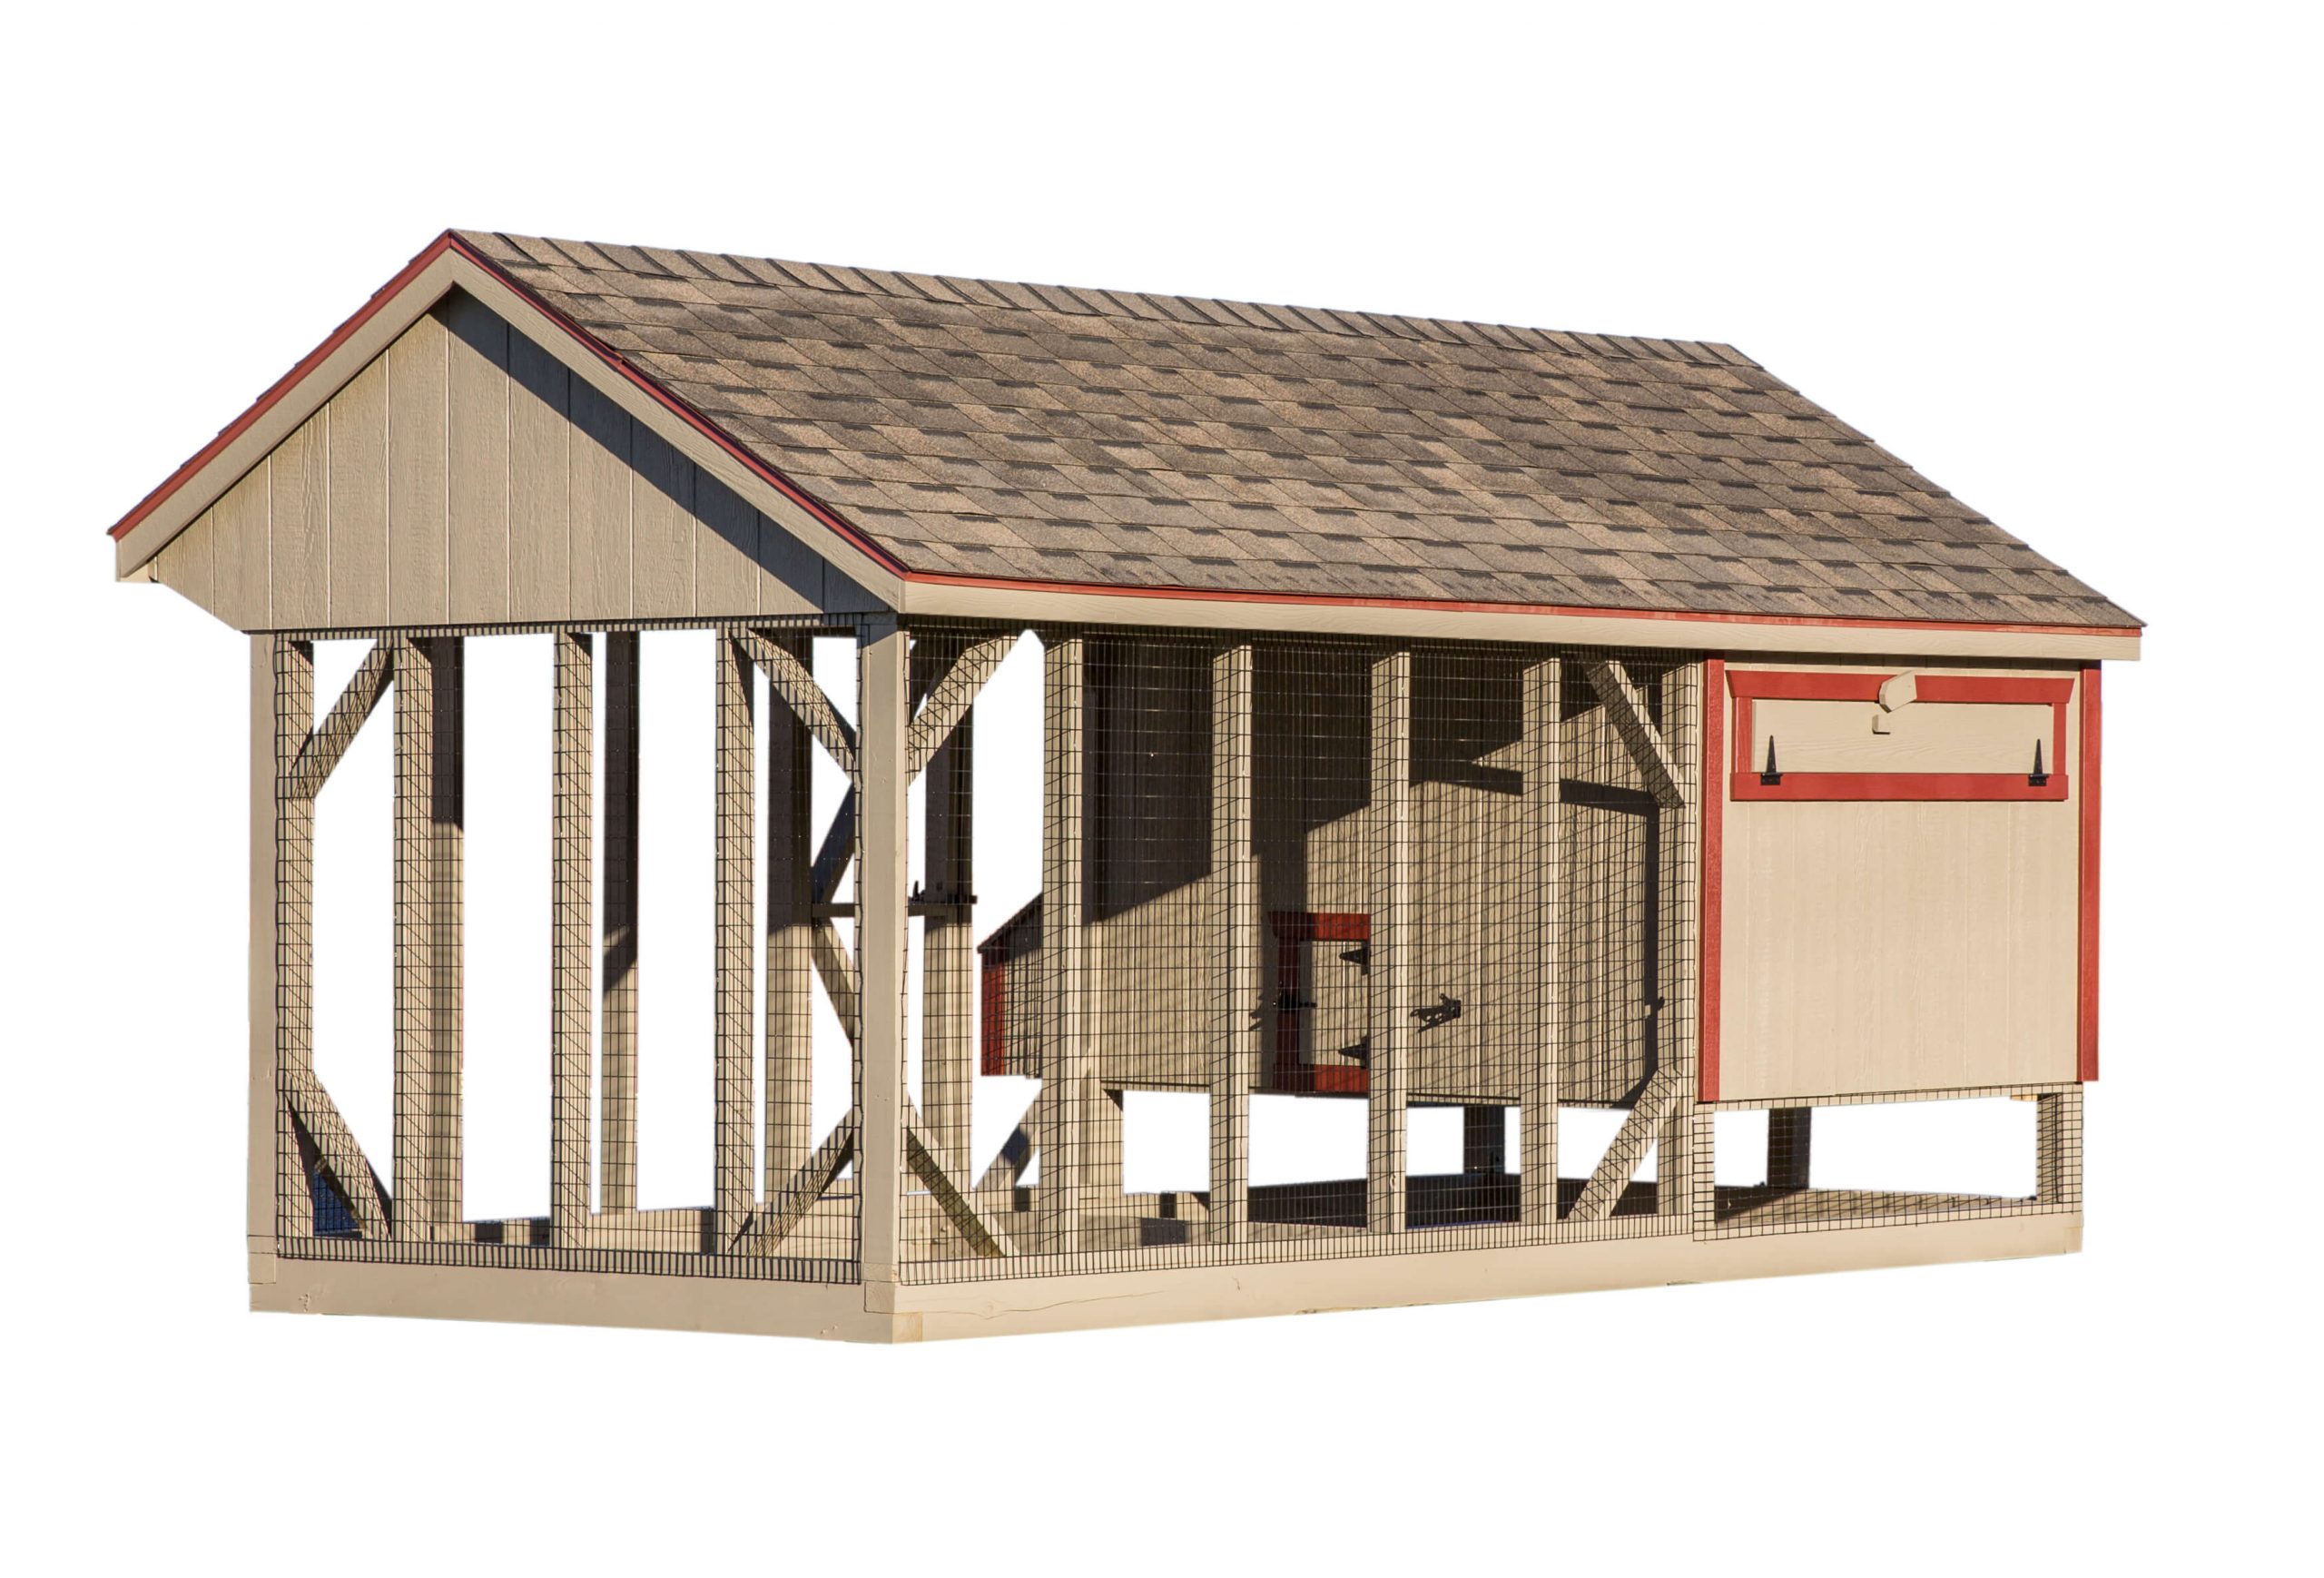 Exterior back view of a 7x16 Quaker Combination chicken coop with cupola